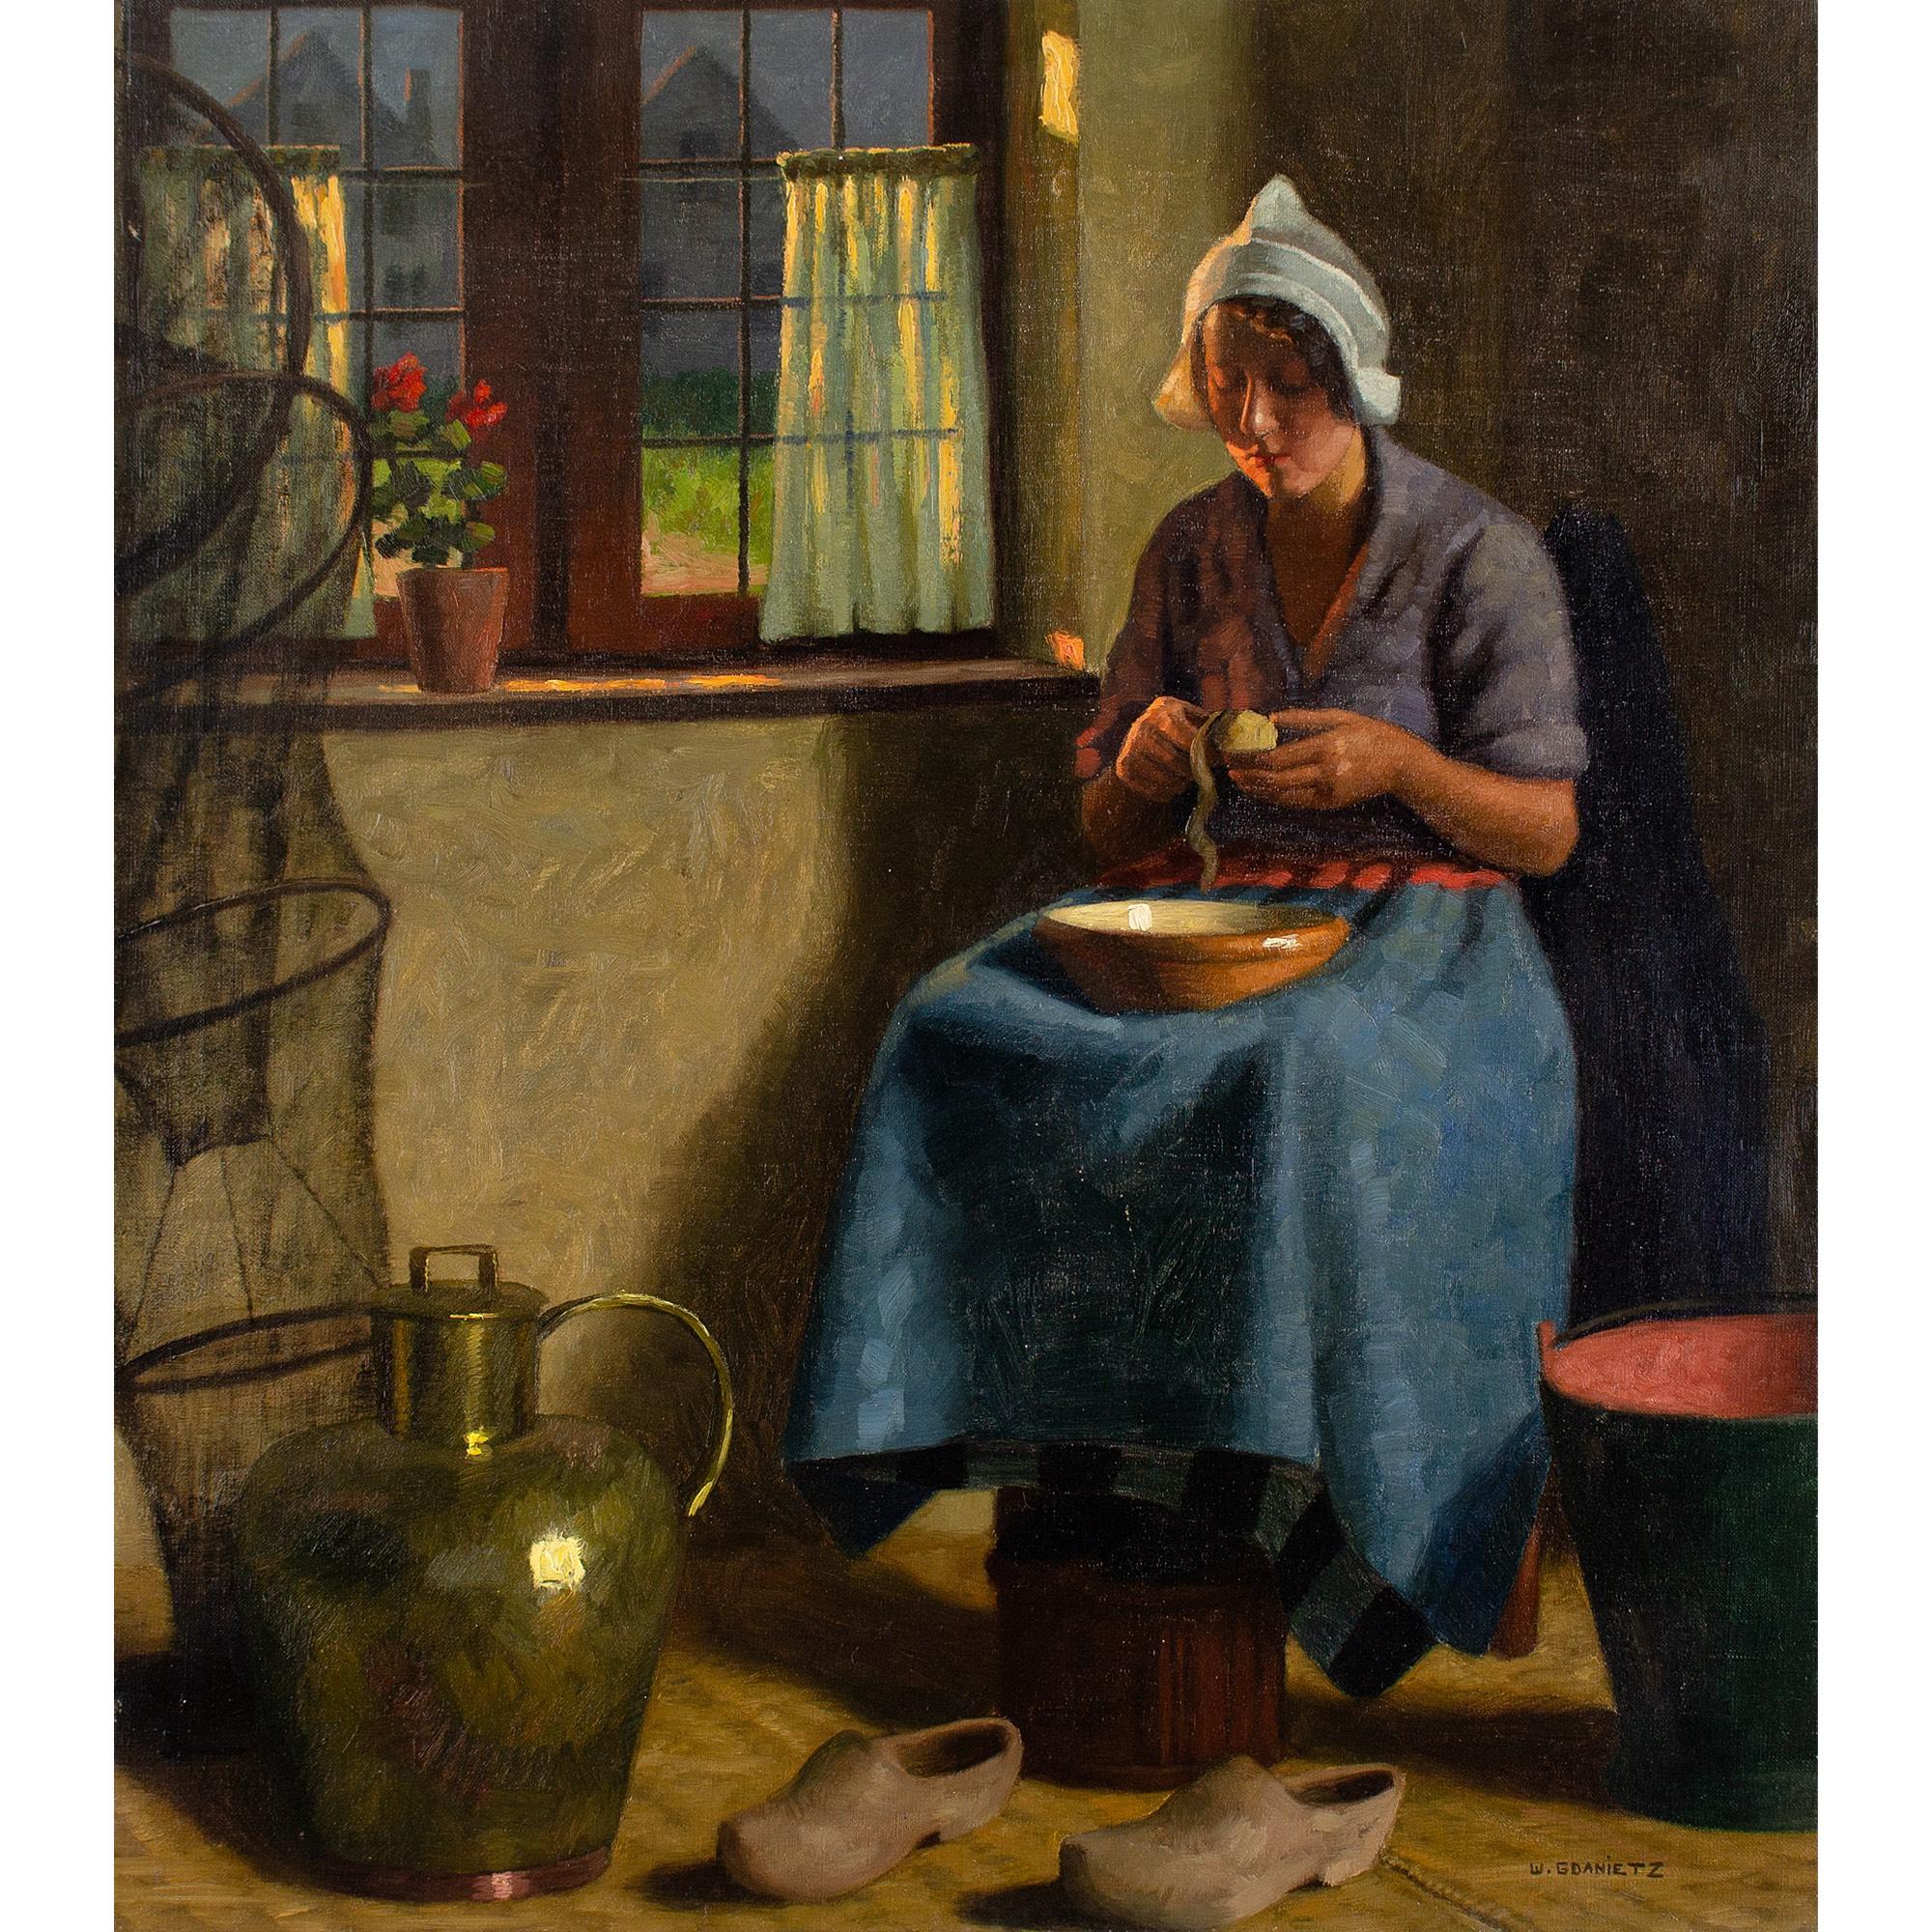 This mid-20th-century oil on canvas by German artist Wilhelm Gdanietz (1893-1969) depicts a woman peeling potatoes within a rustic interior.

Sitting by a window to catch the last of the day’s light, she’s perched on a stool with clogs off. A